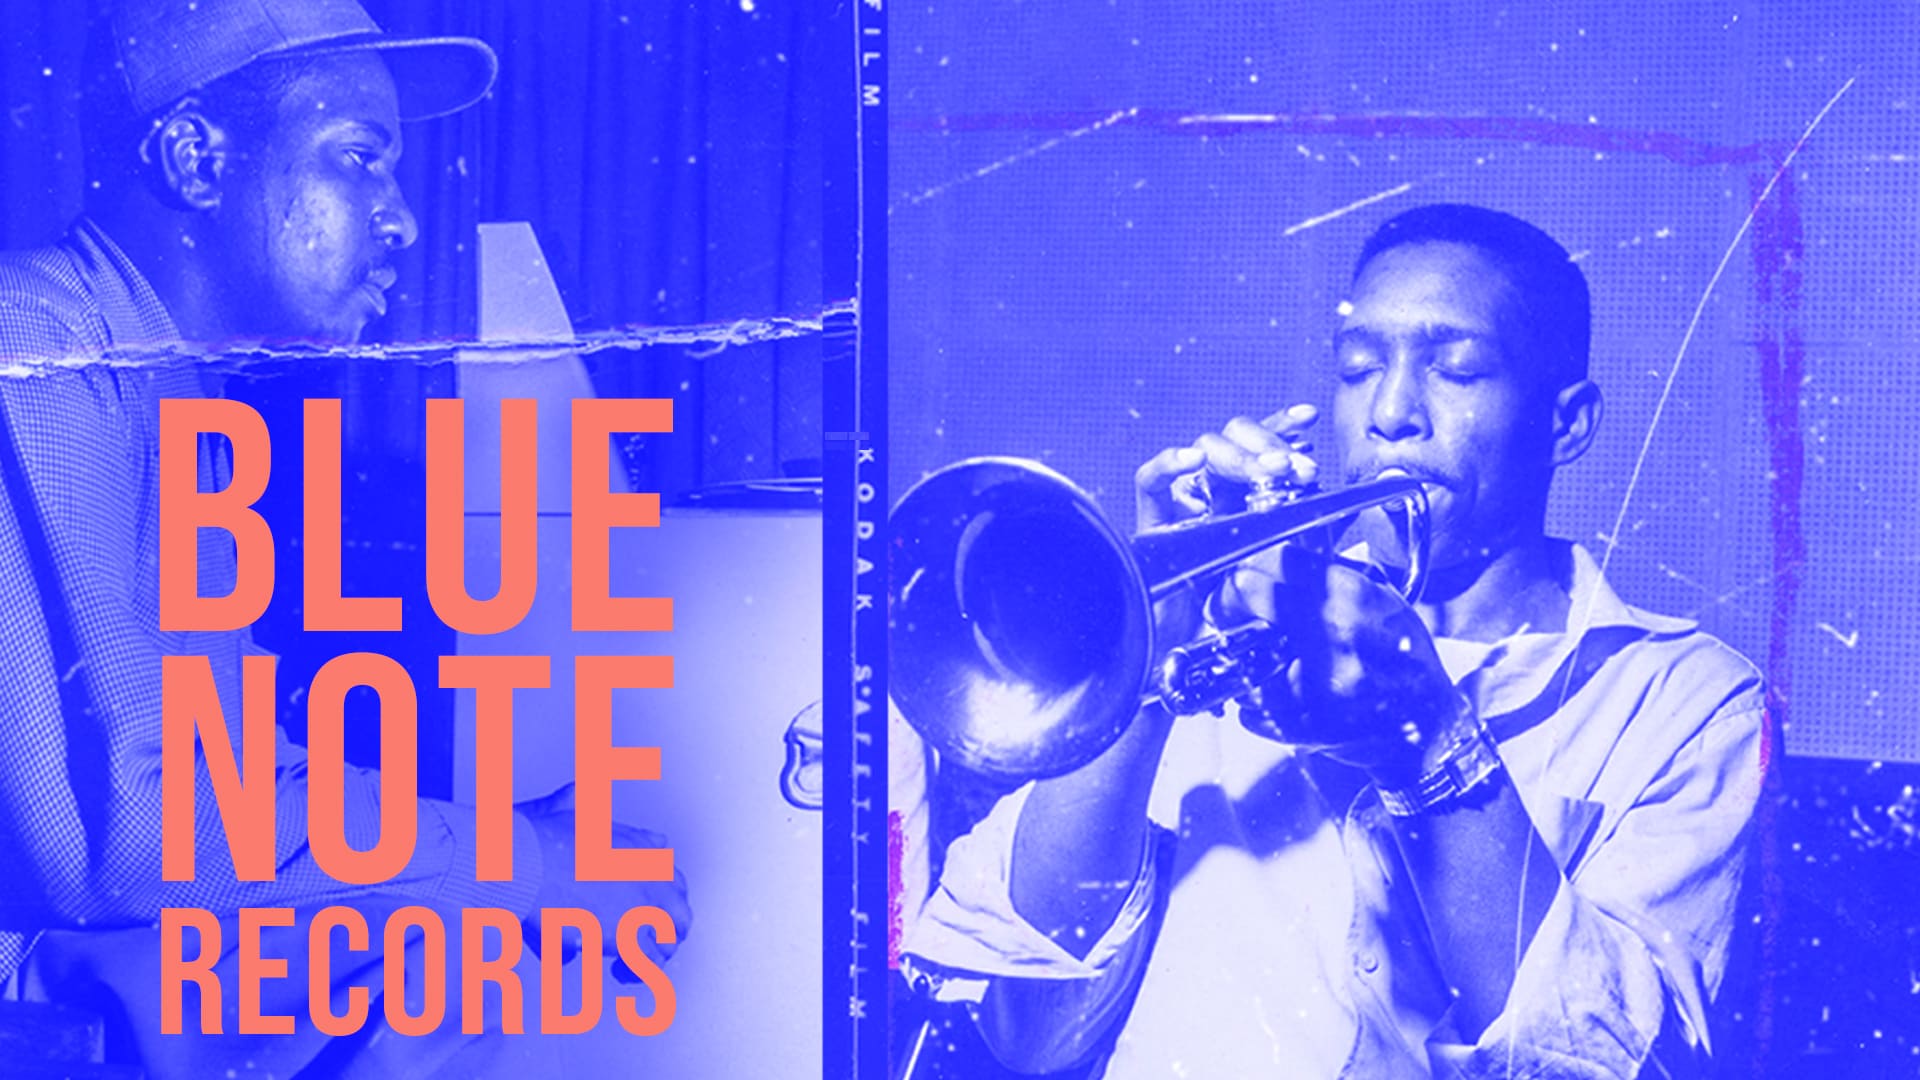 Blue Note Records - Beyond the Notes